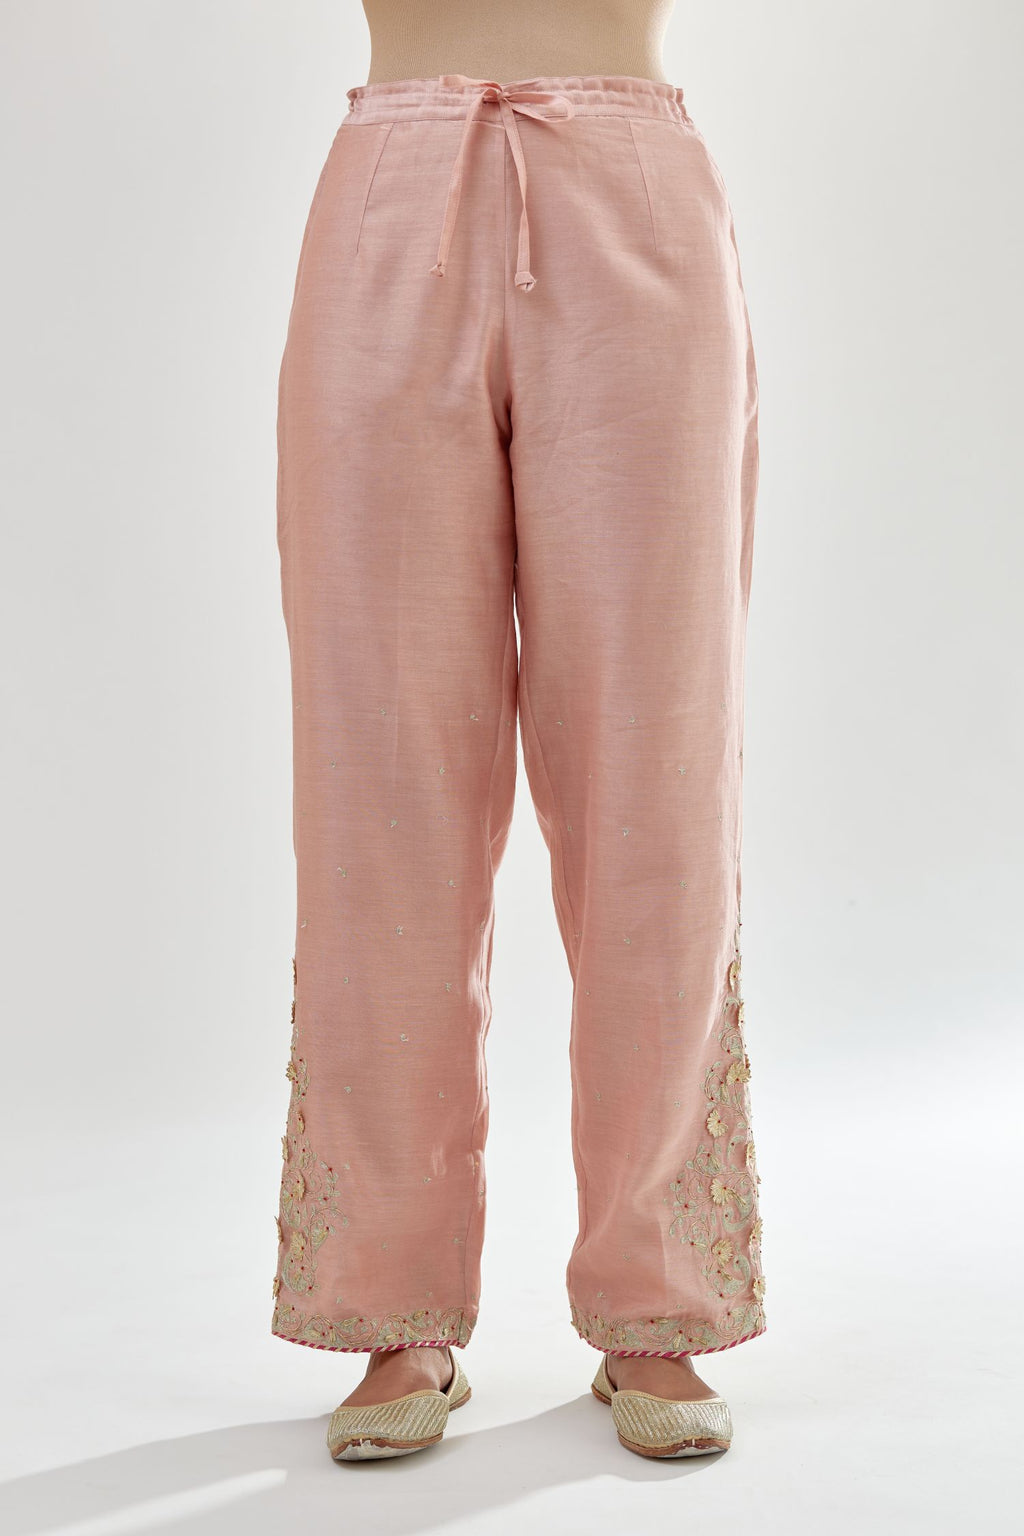 Pink silk chanderi straight pants, hem is detailed with zari, dori and gota embroidered boota at sides.